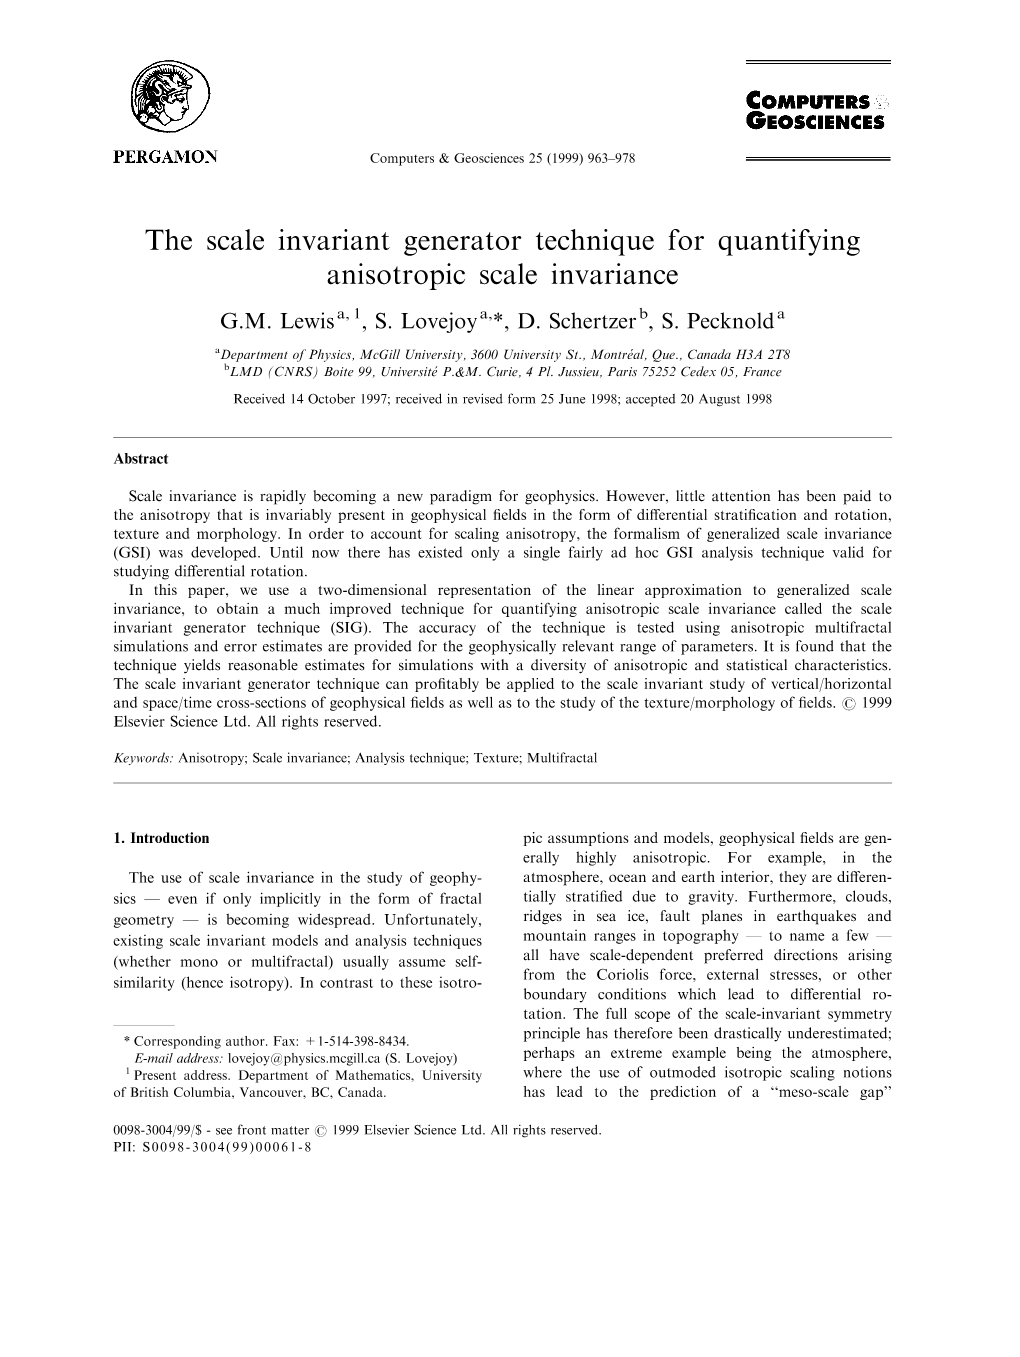 The Scale Invariant Generator Technique for Quantifying Anisotropic Scale Invariance